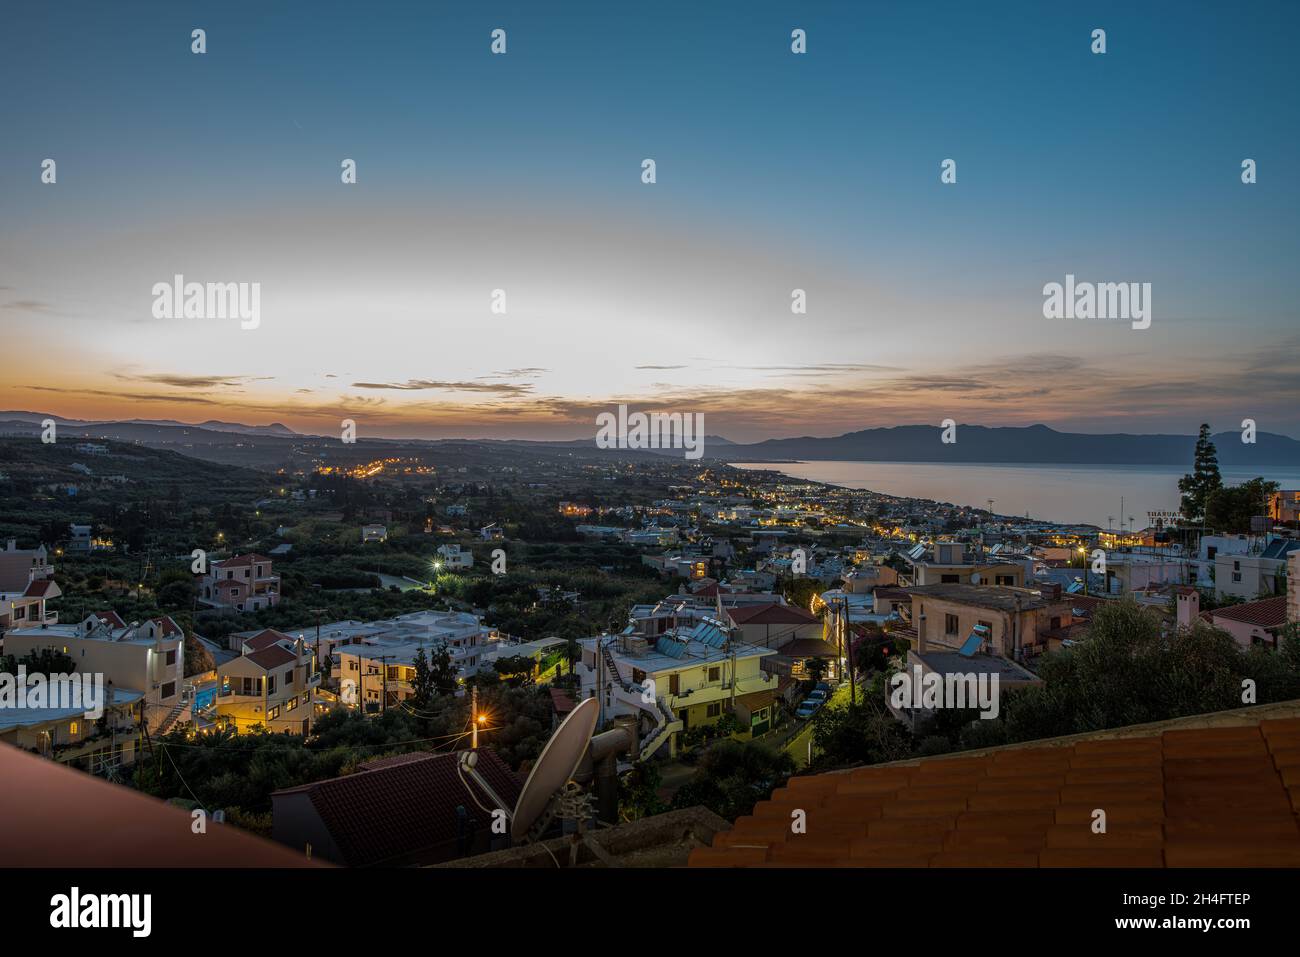 Night over Platanias bay from a high viewpoint, Crete, Greece, October 10, 2021 Stock Photo